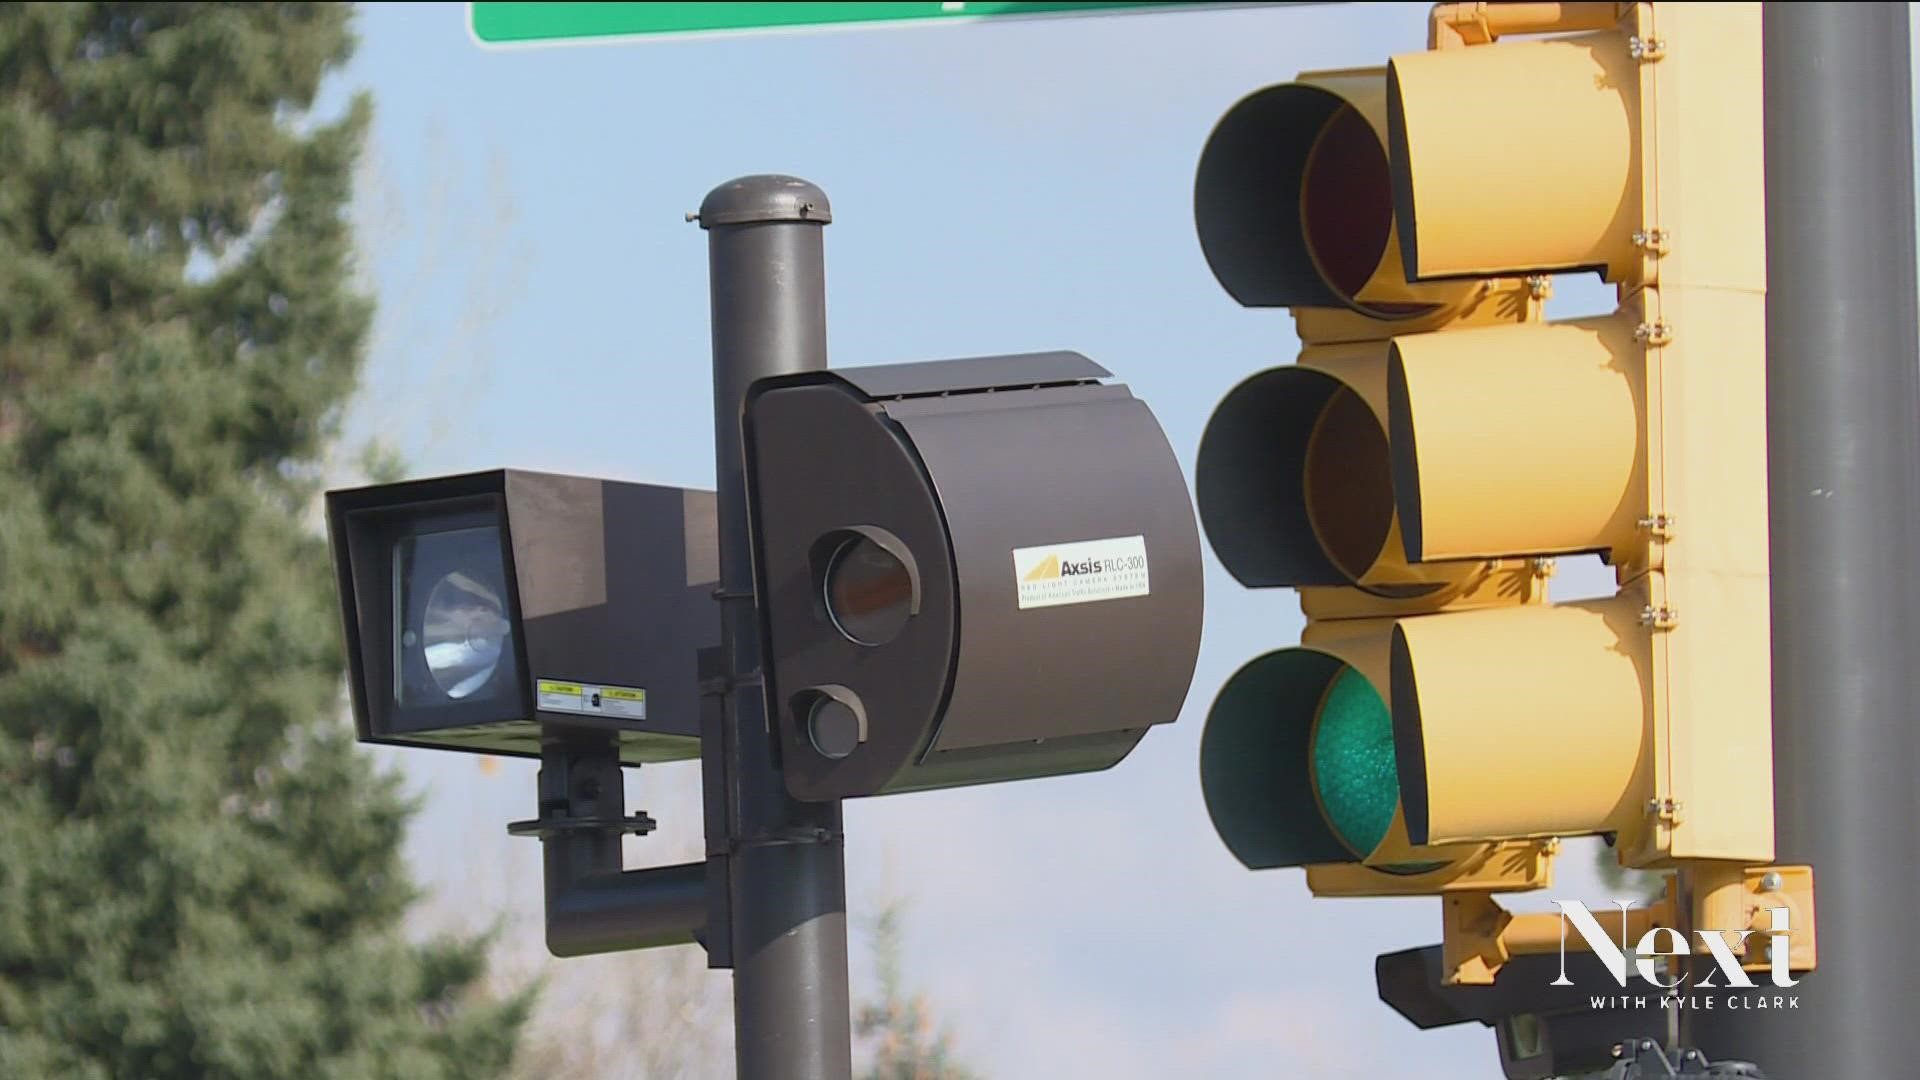 Aurora Police will deploy three photo radar vans for a one-year pilot program. The revenue from the tickets will pay for the pilot program and road safety measures.